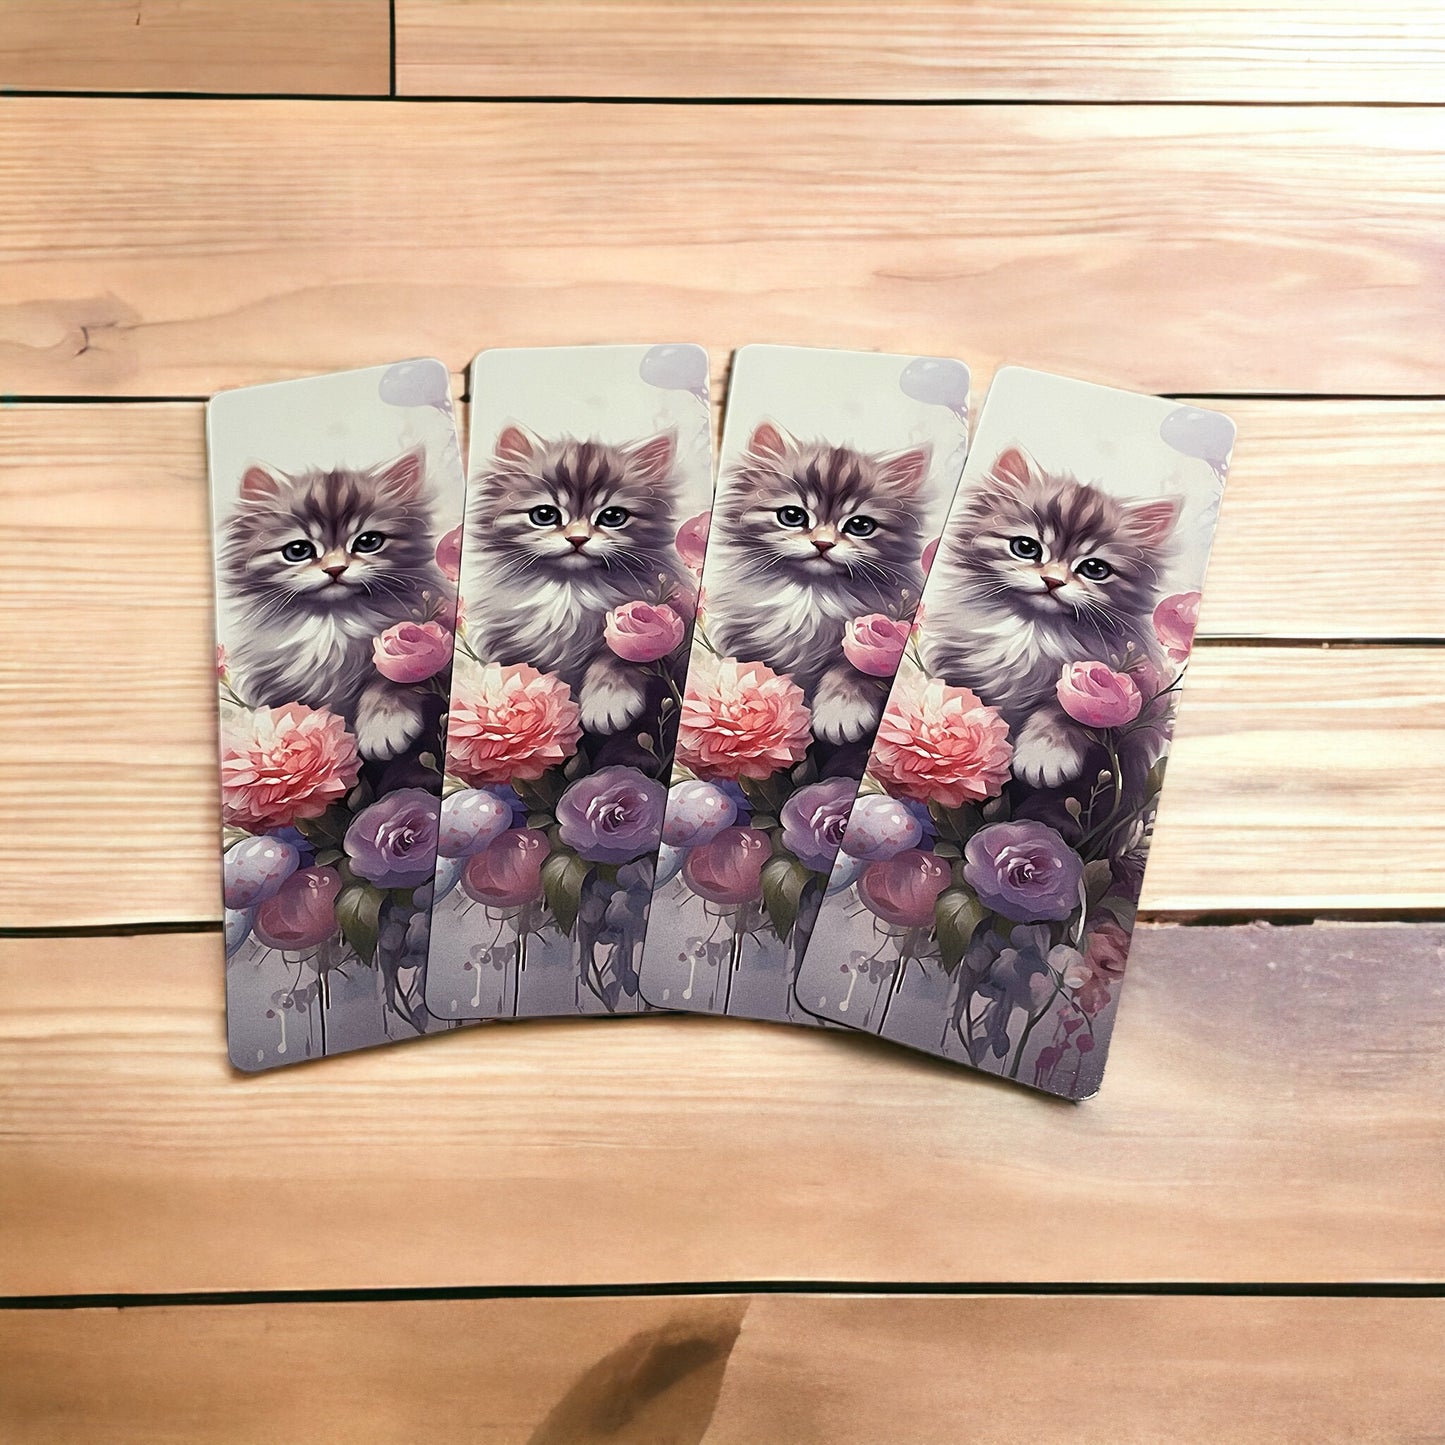 Lovely illustrated printed bookmark, Page Saver, Book Lover Gift, Floral Kitten